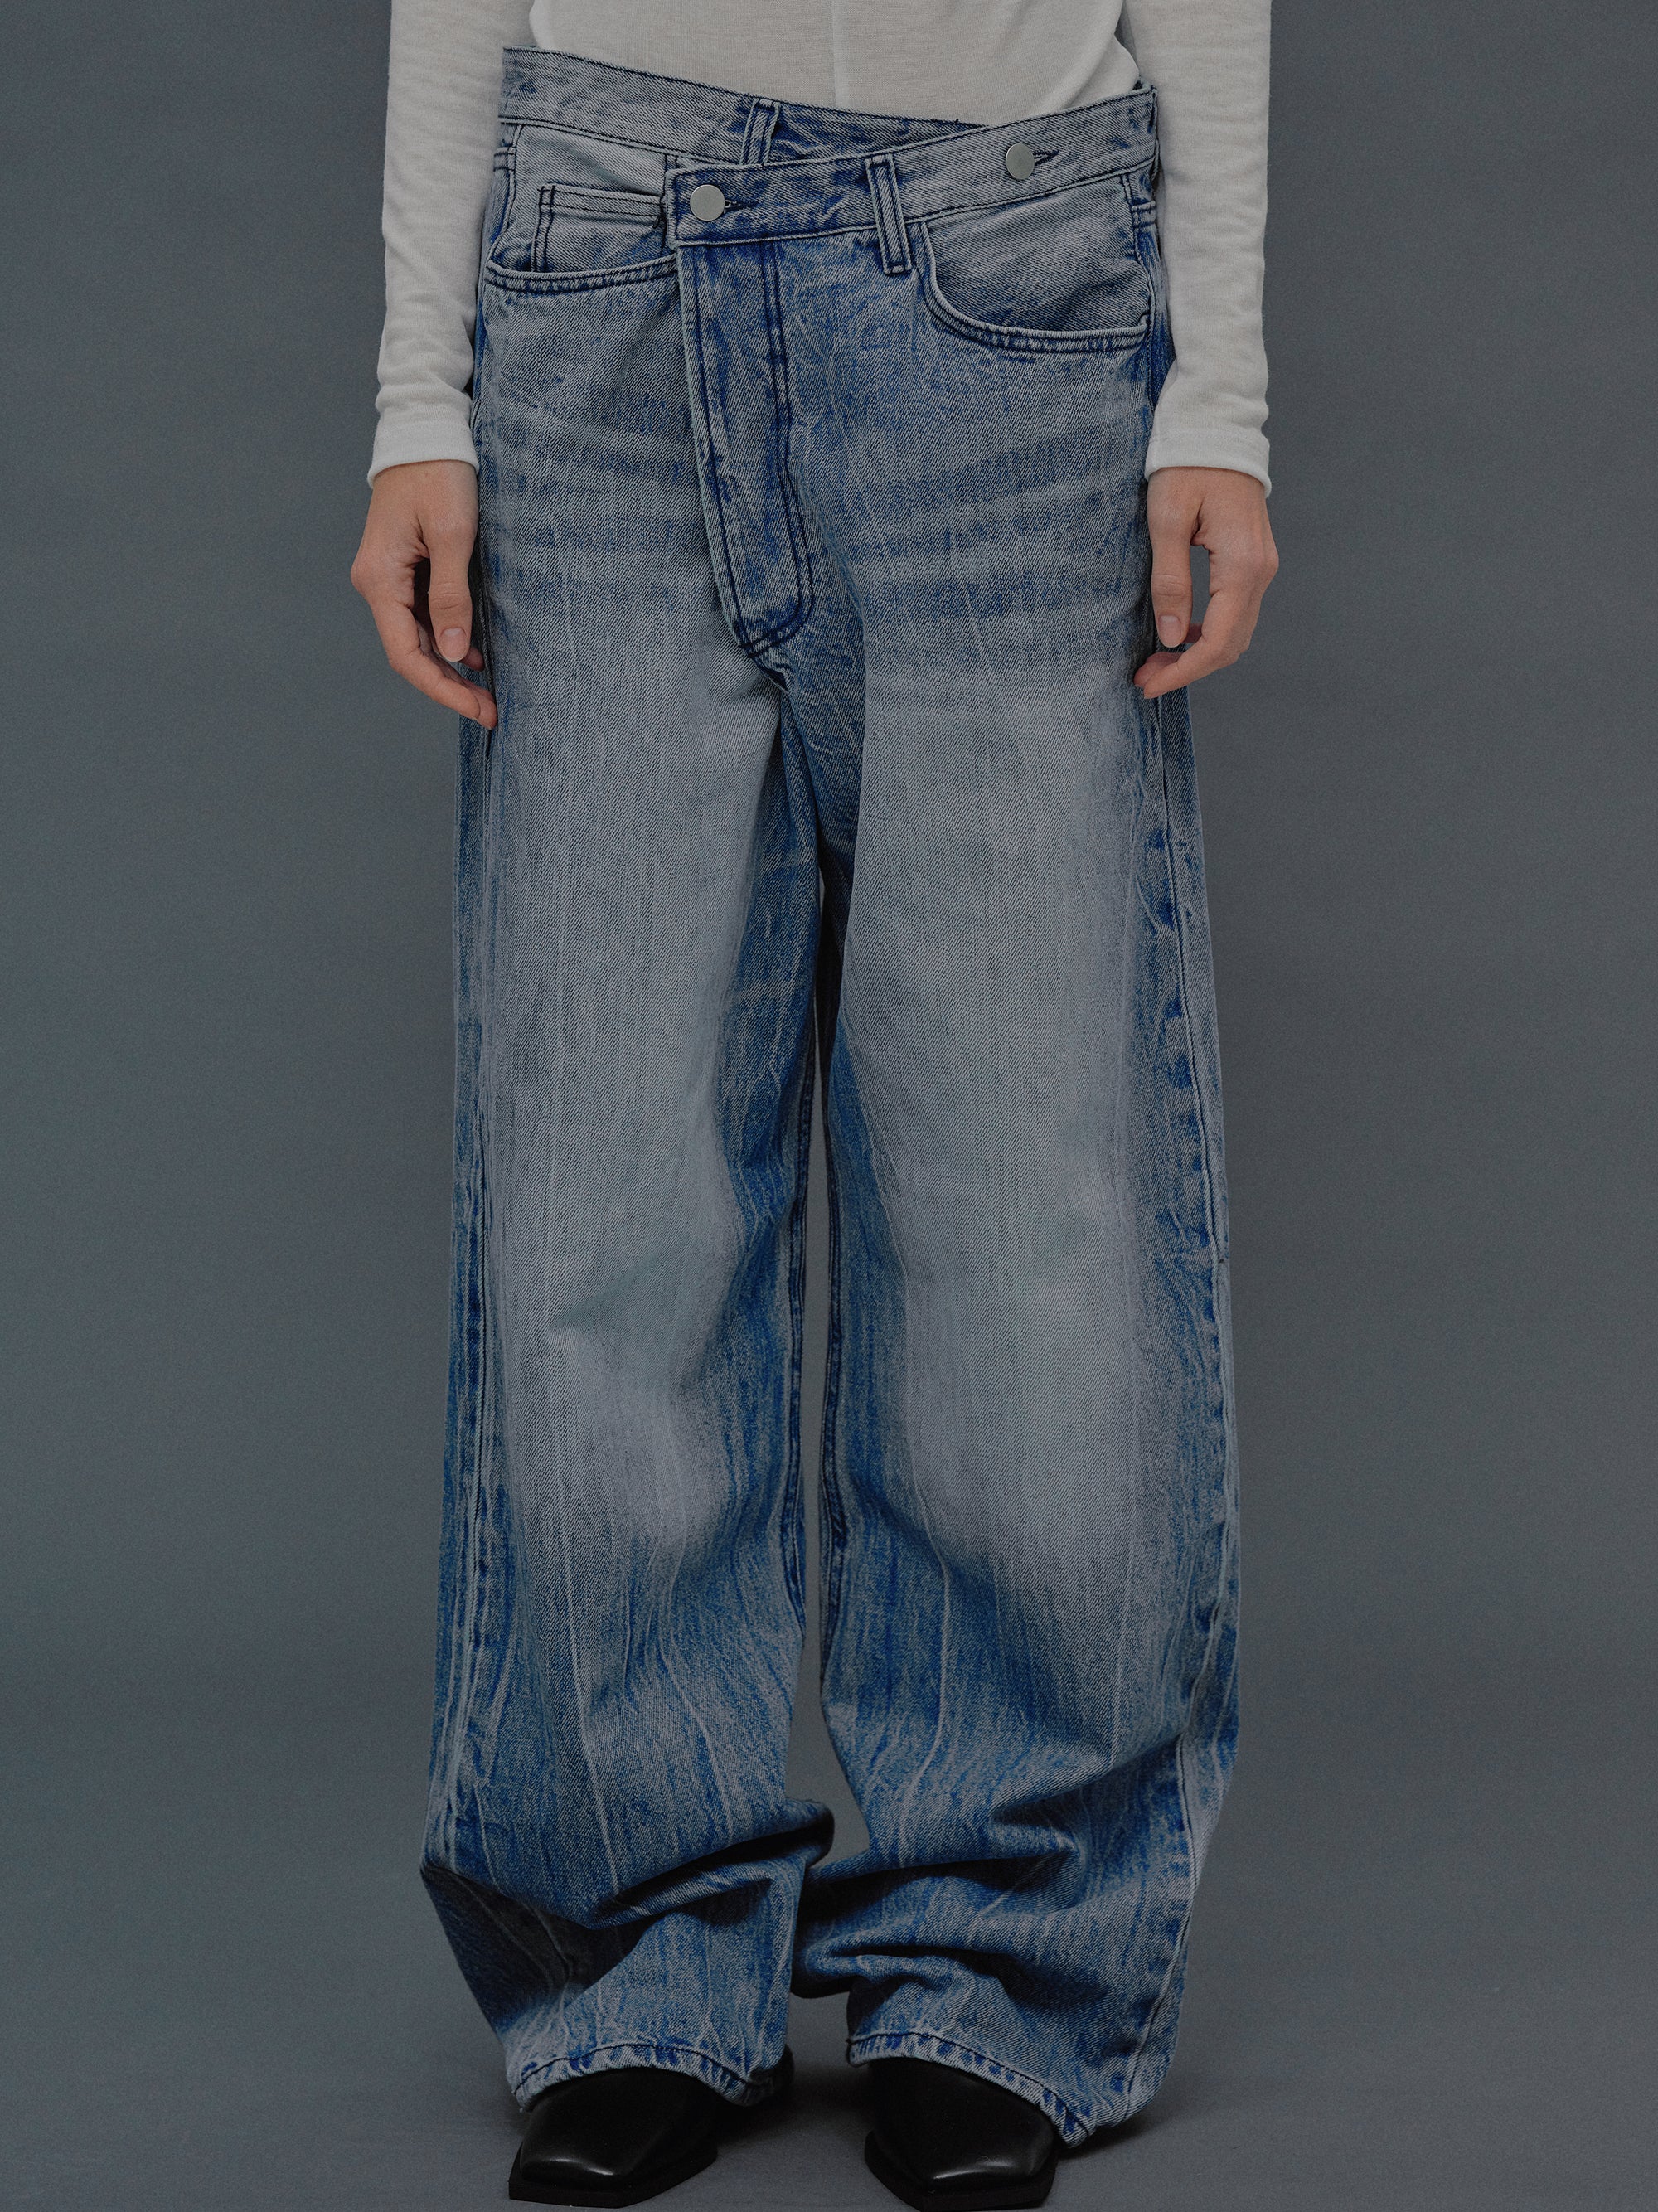 Deconstructed Crossover Jeans, Medium Blue – SourceUnknown